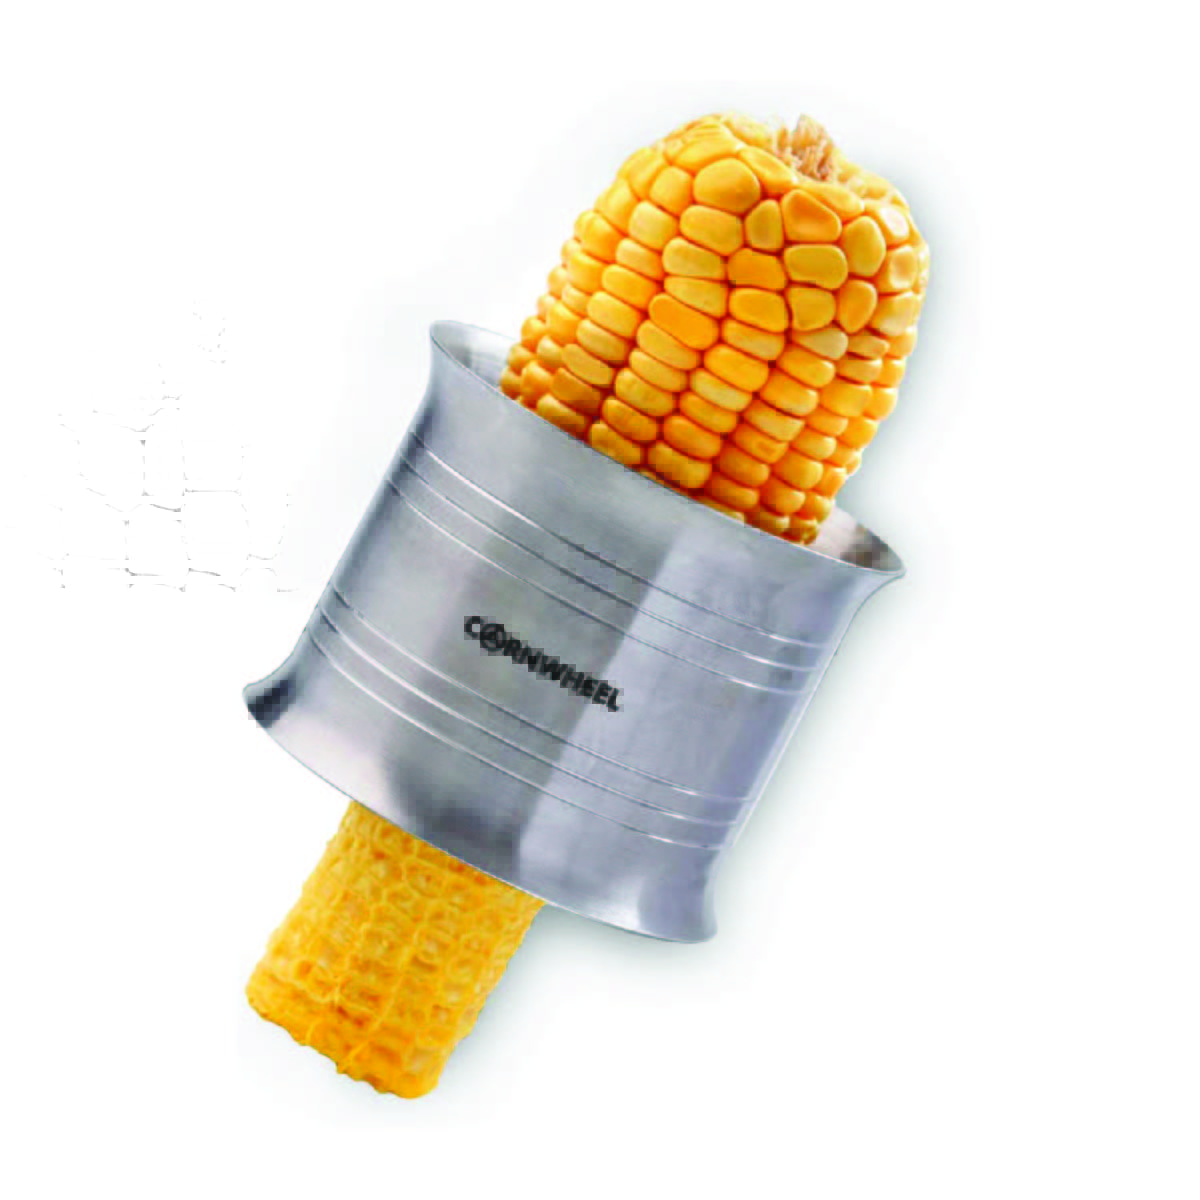 A cob of corn with a cylinder-shaped stainless steel gadget around it that can be used to strip the corn from the cob.